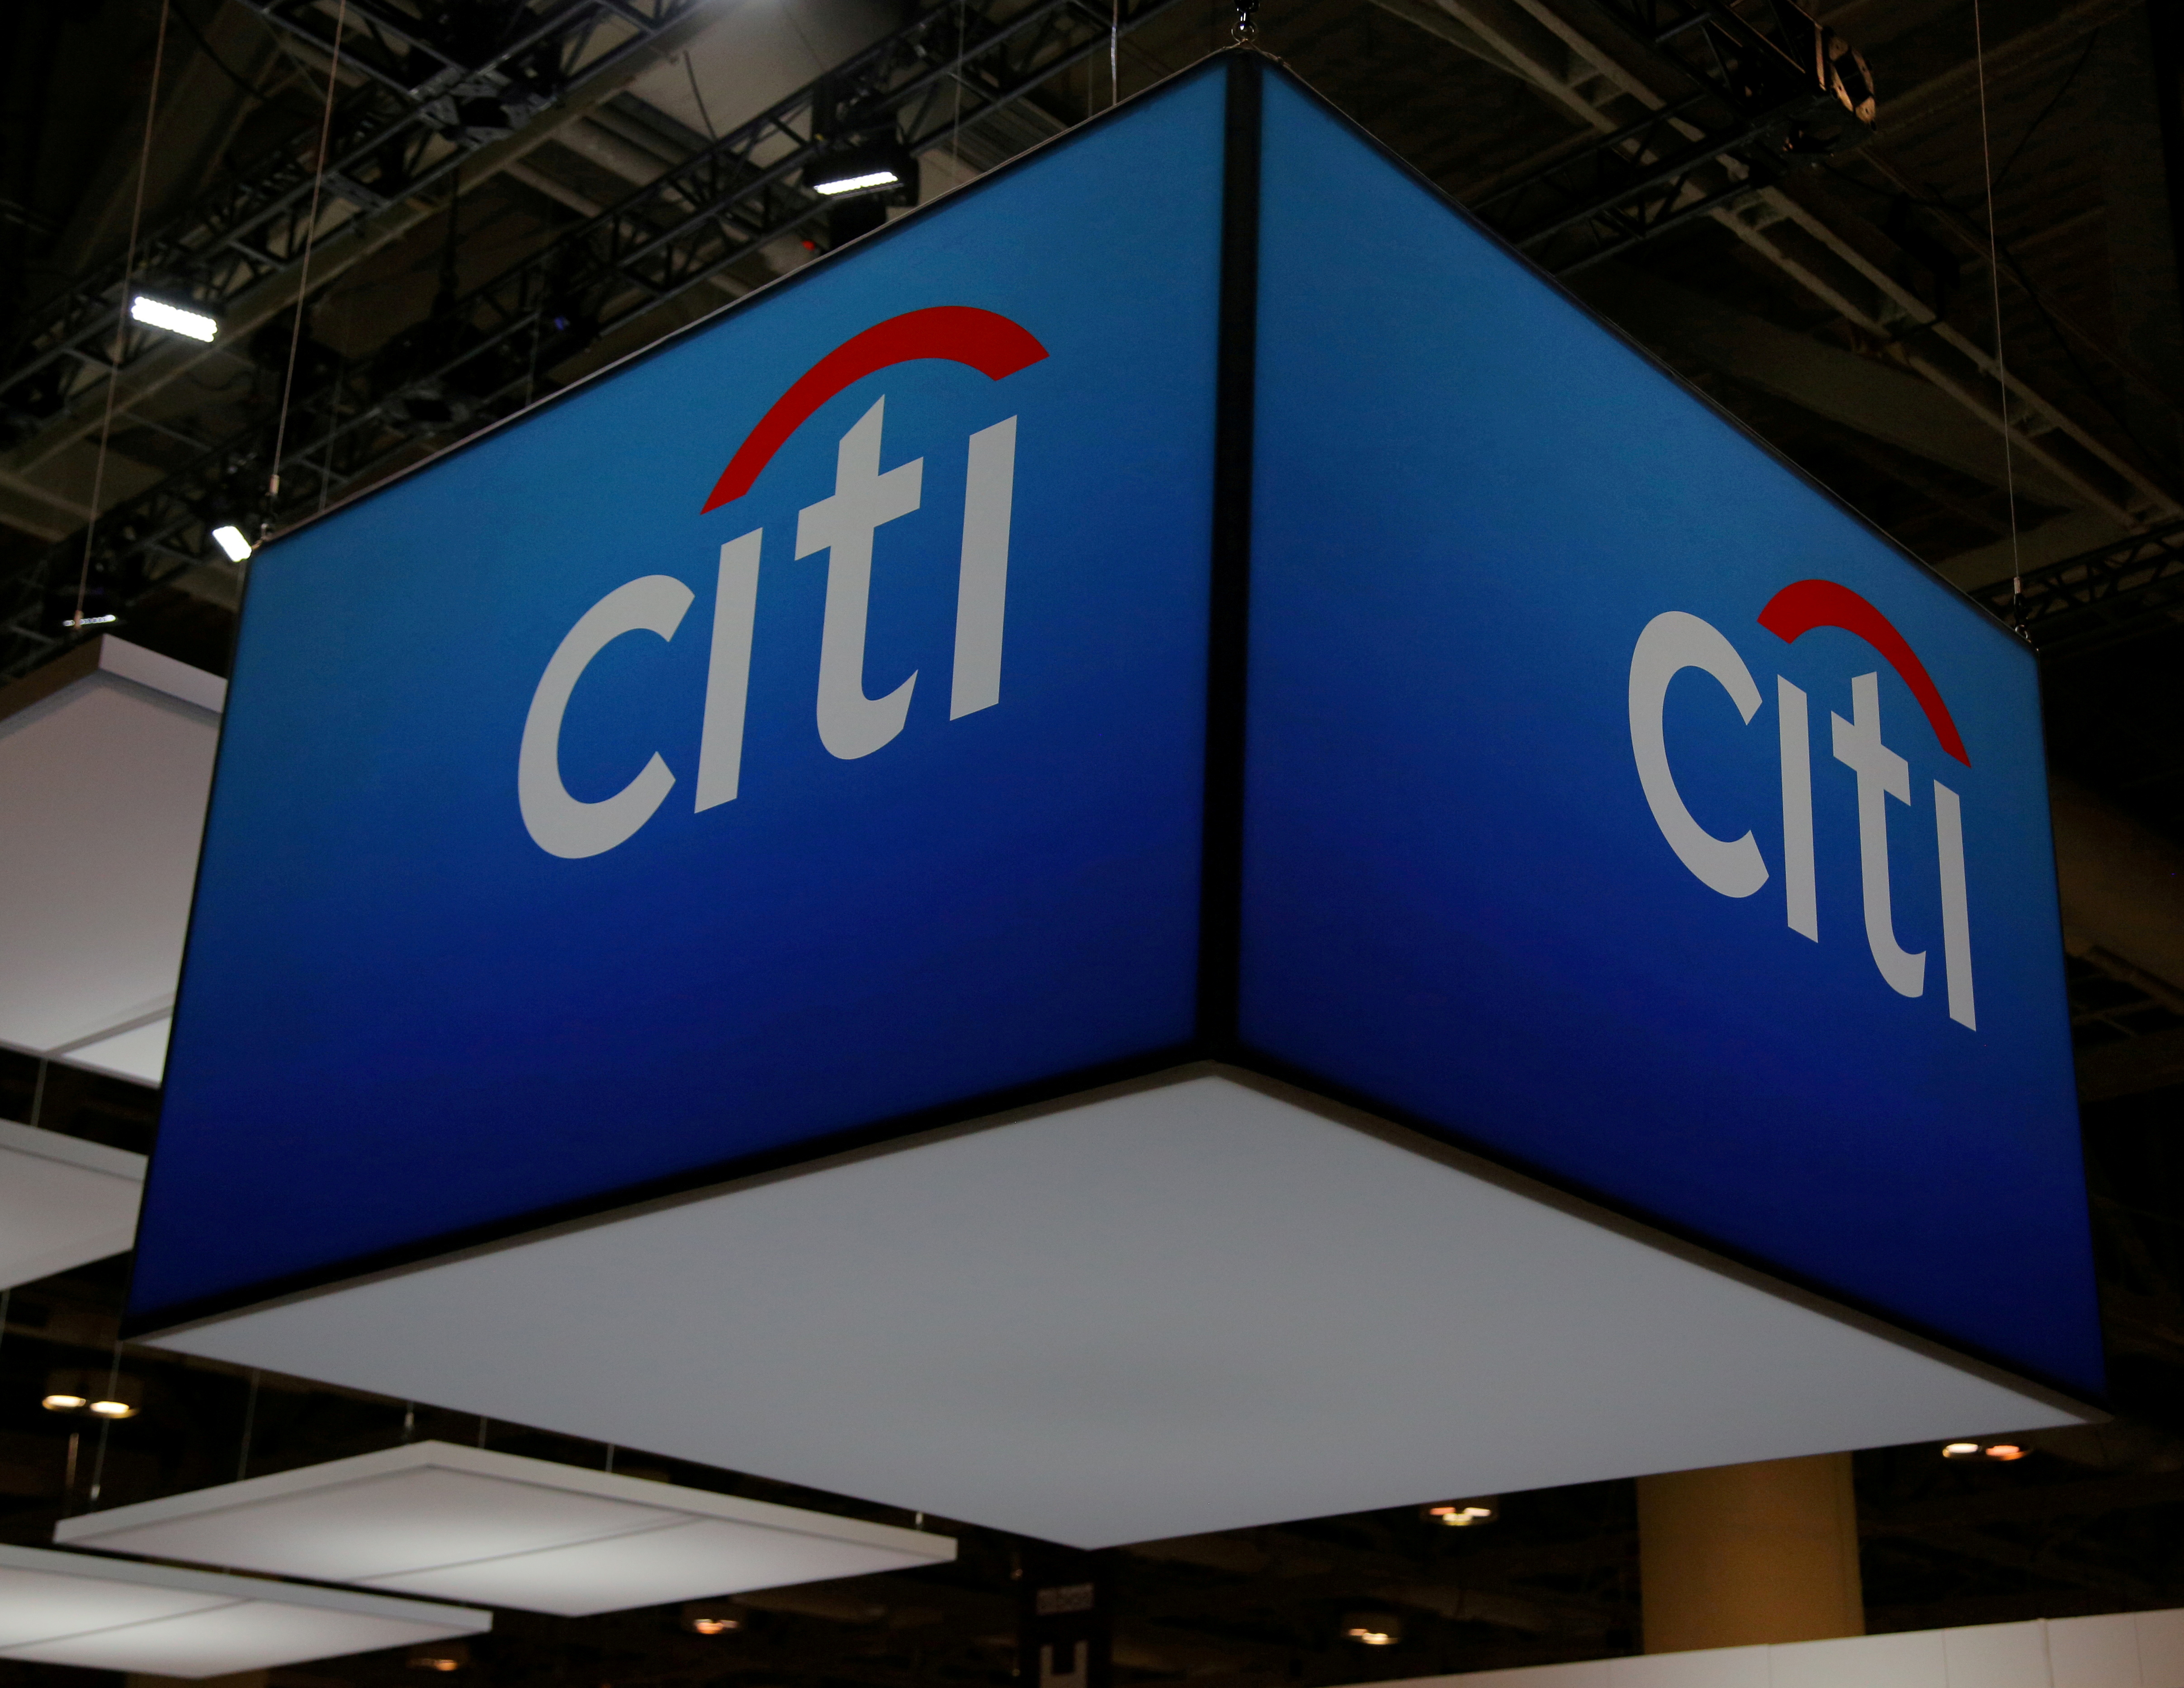 No jab, no job: Citigroup to fire unvaccinated staff this month – memo